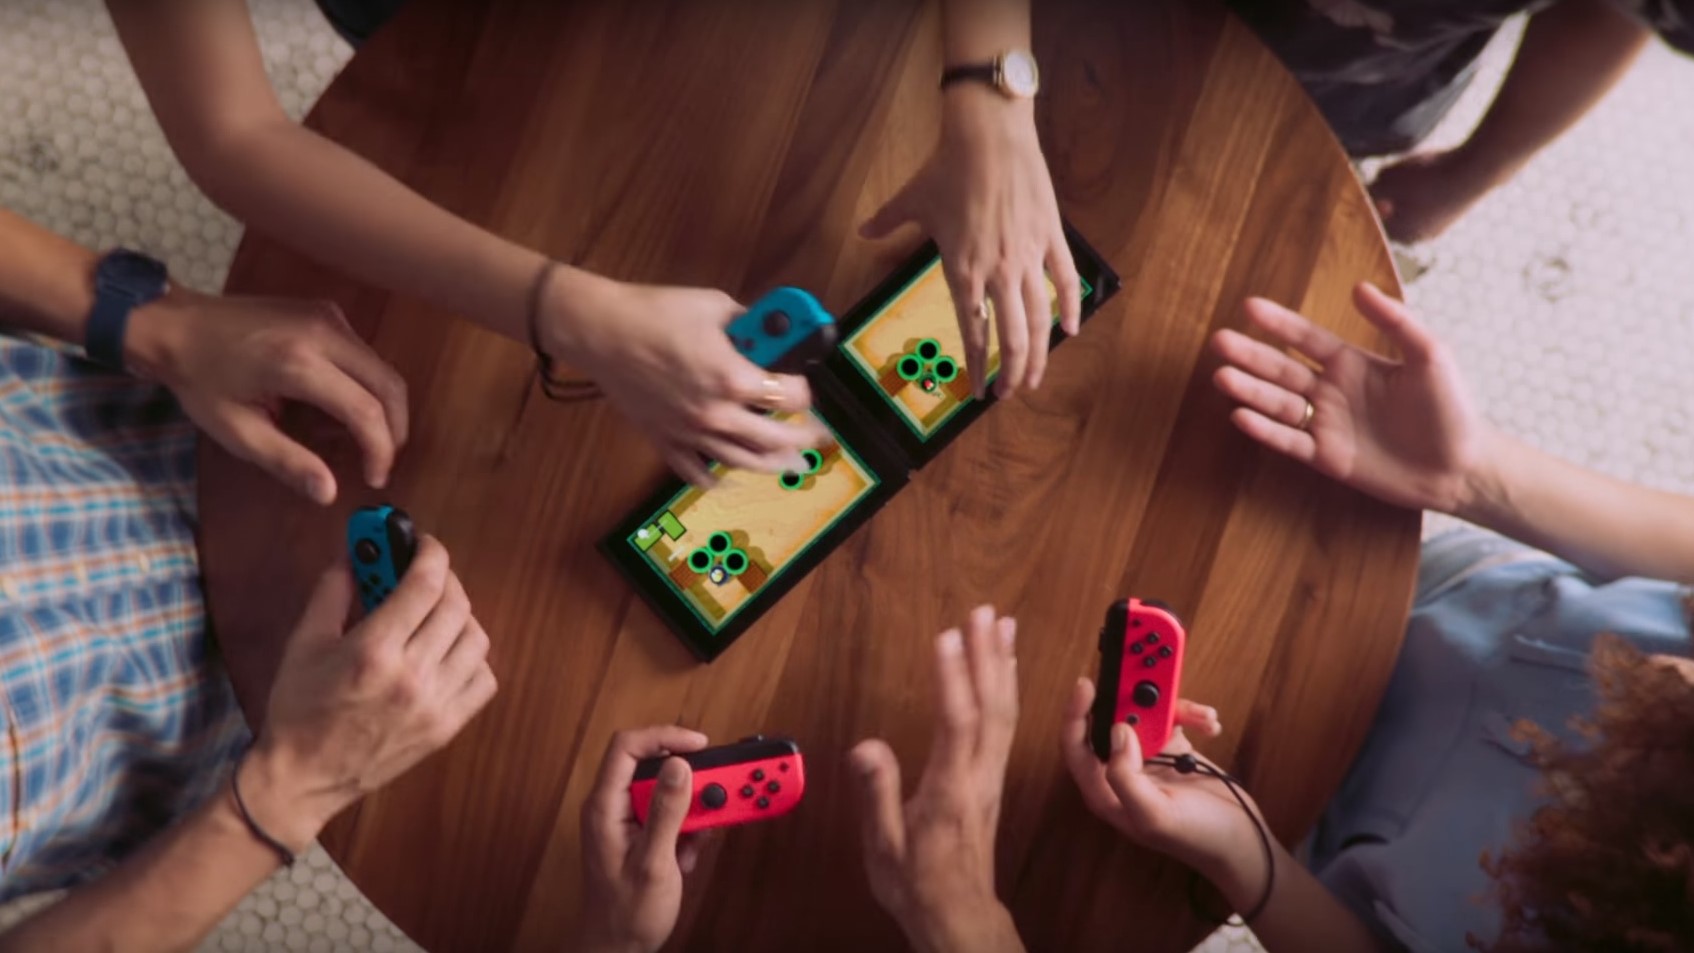 Nintendo Switch finally leans into its E3 2018: multiplayer anyhow, anywhere | TechRadar